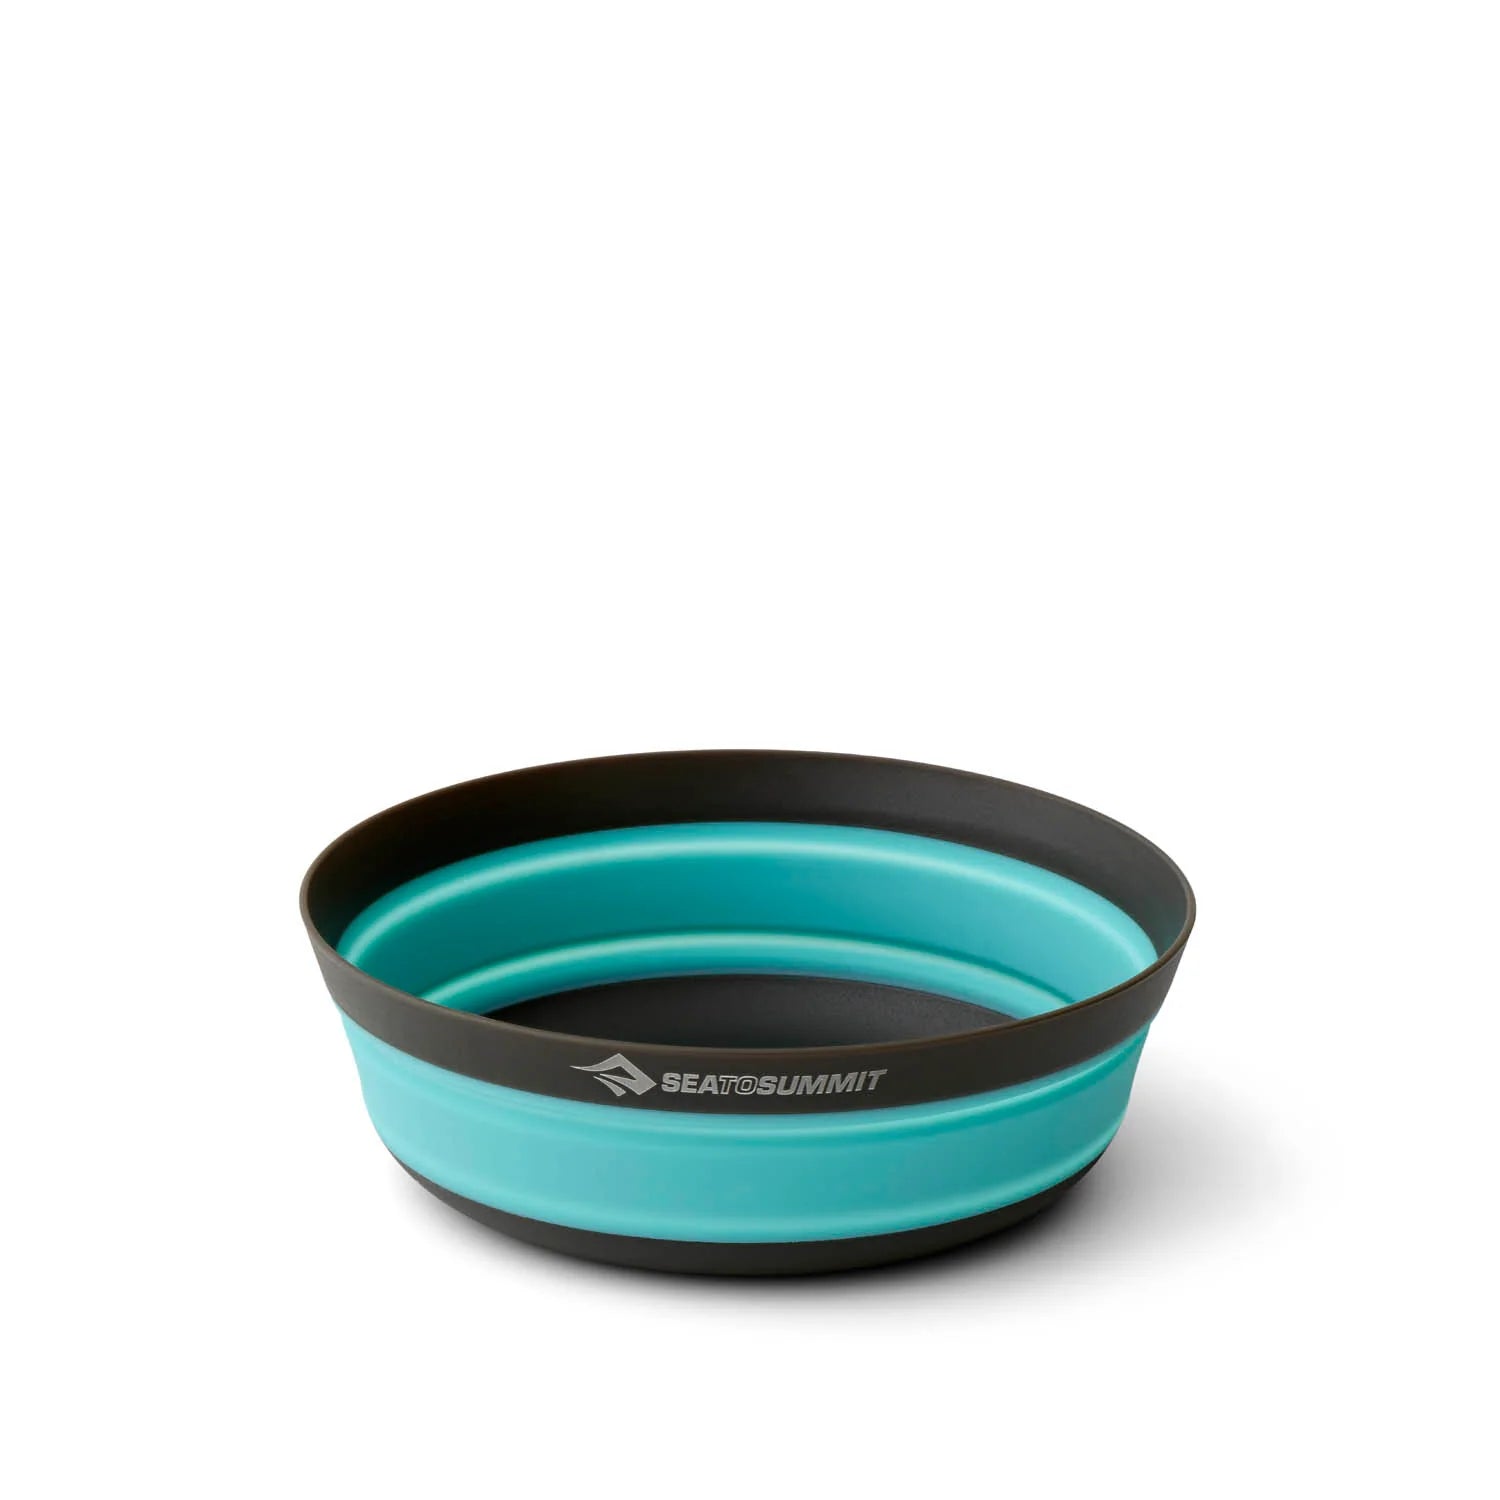 Sea to Summit Frontier UL Collapsible Bowl - Large - BLUE - Mansfield Hunting & Fishing - Products to prepare for Corona Virus